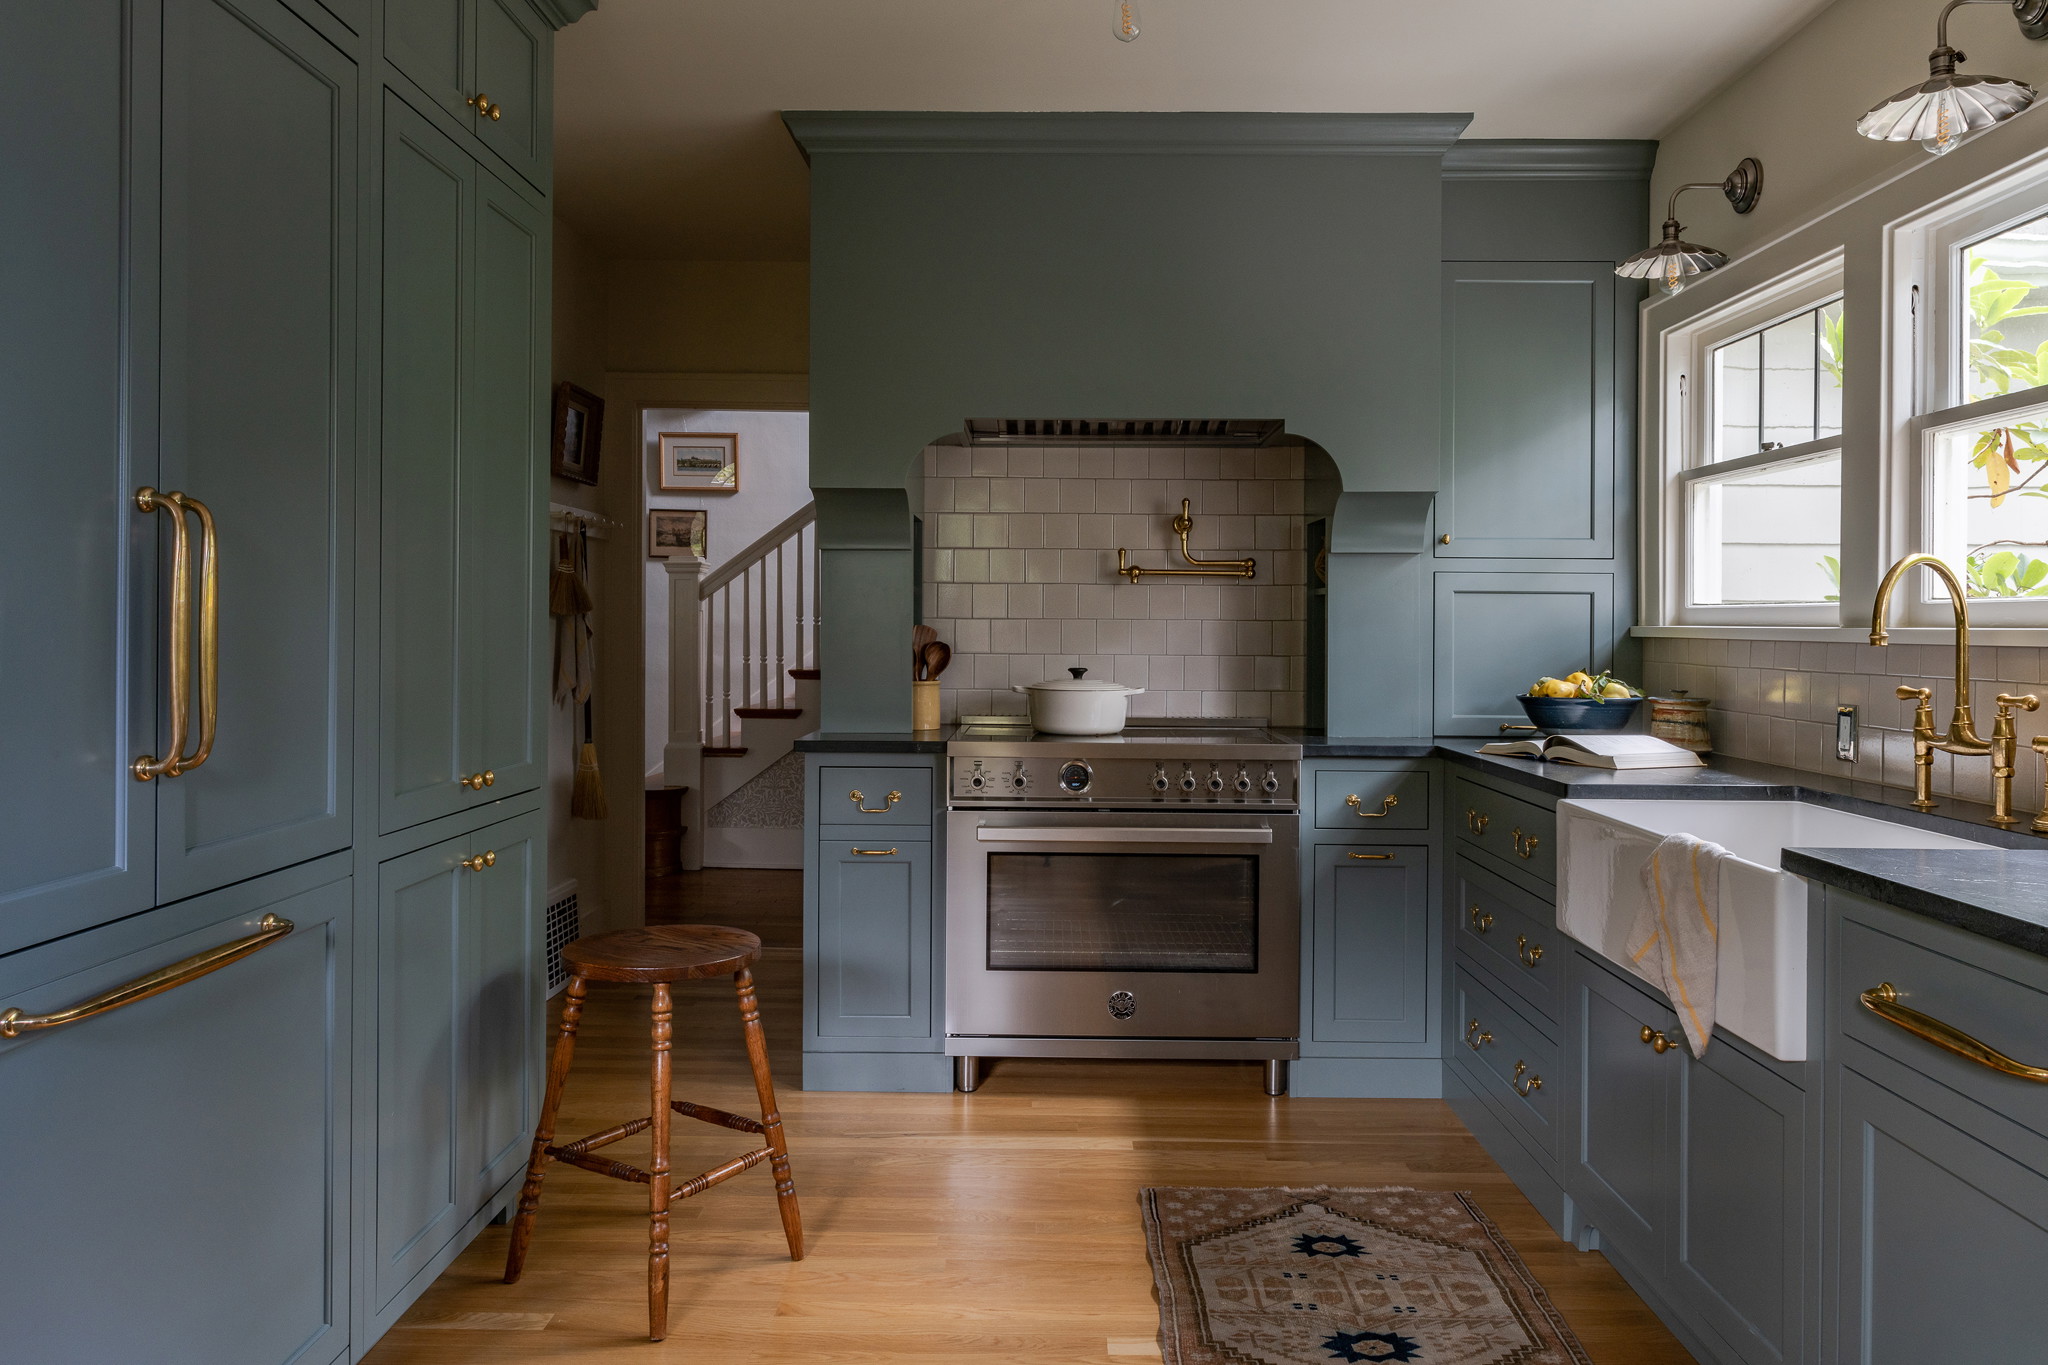 The Expert - Dutch Blue Cabinets Connect This 1930s Colonial Revival to ...